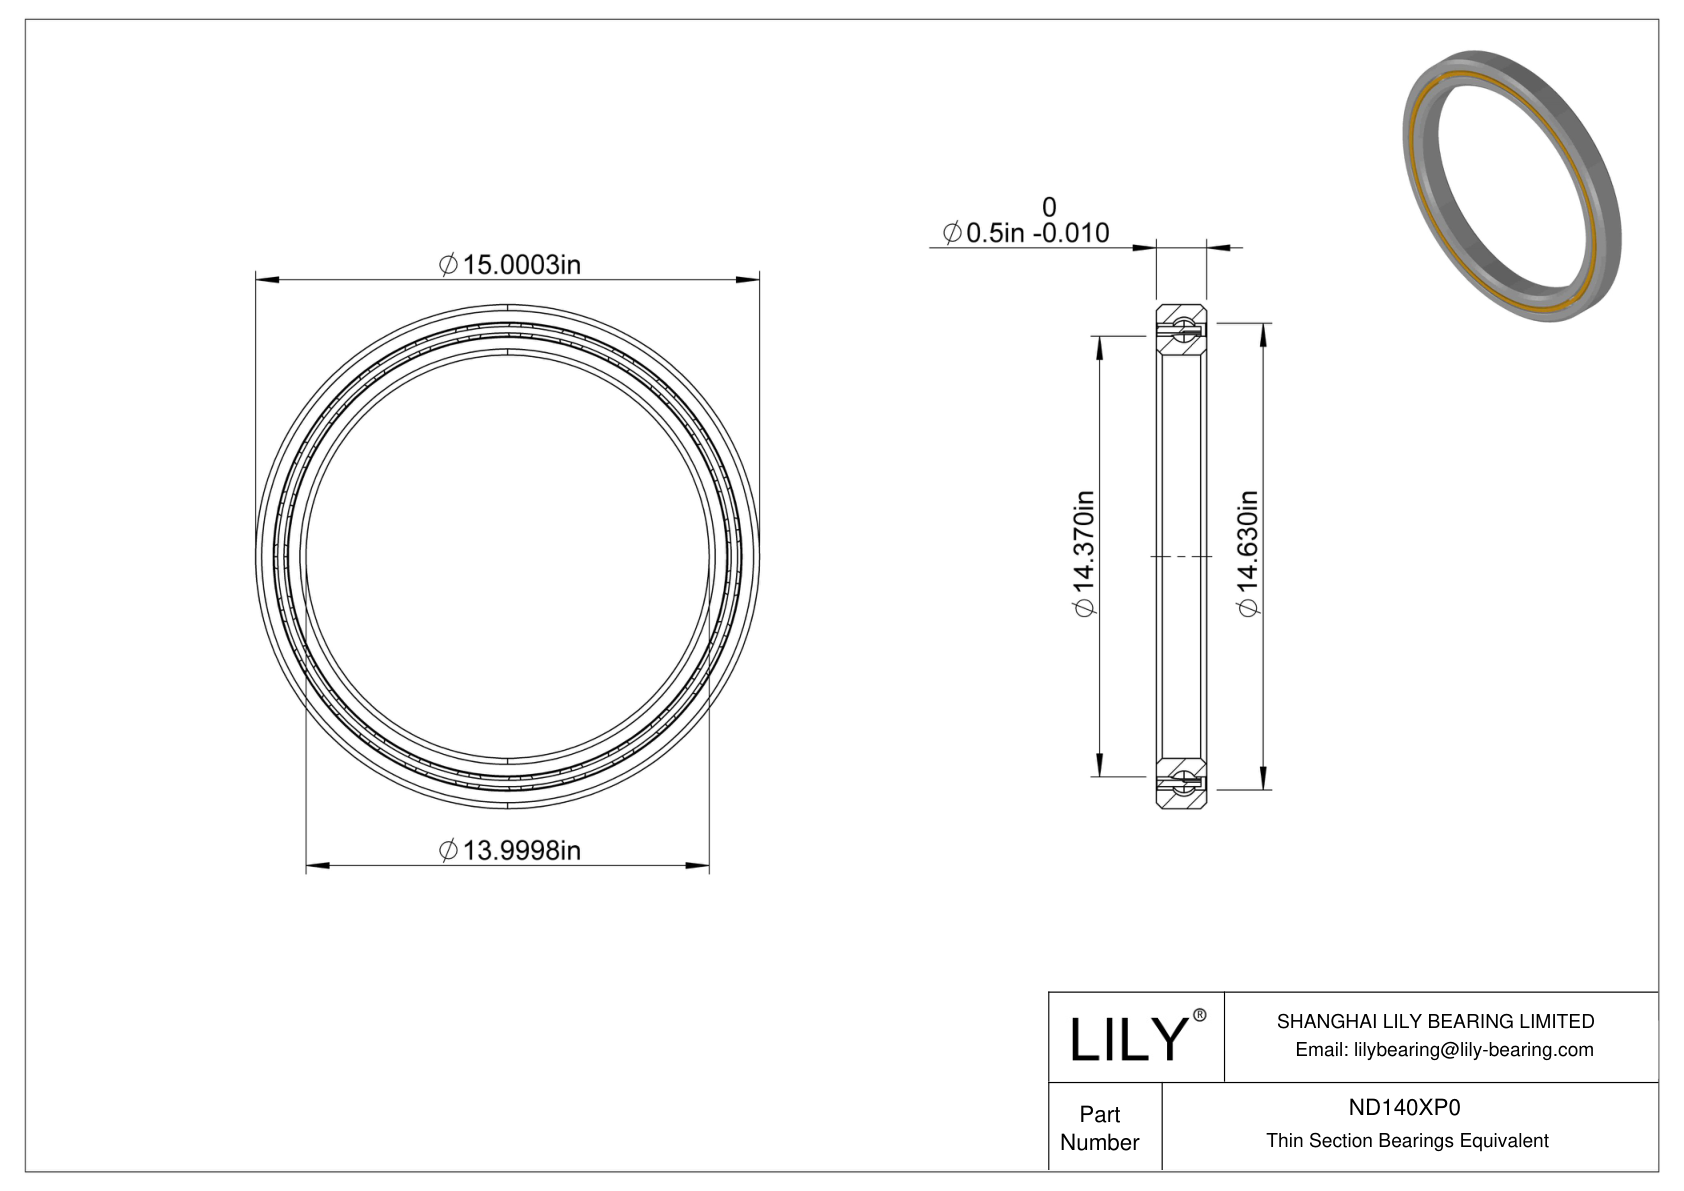 ND140XP0 Constant Section (CS) Bearings cad drawing